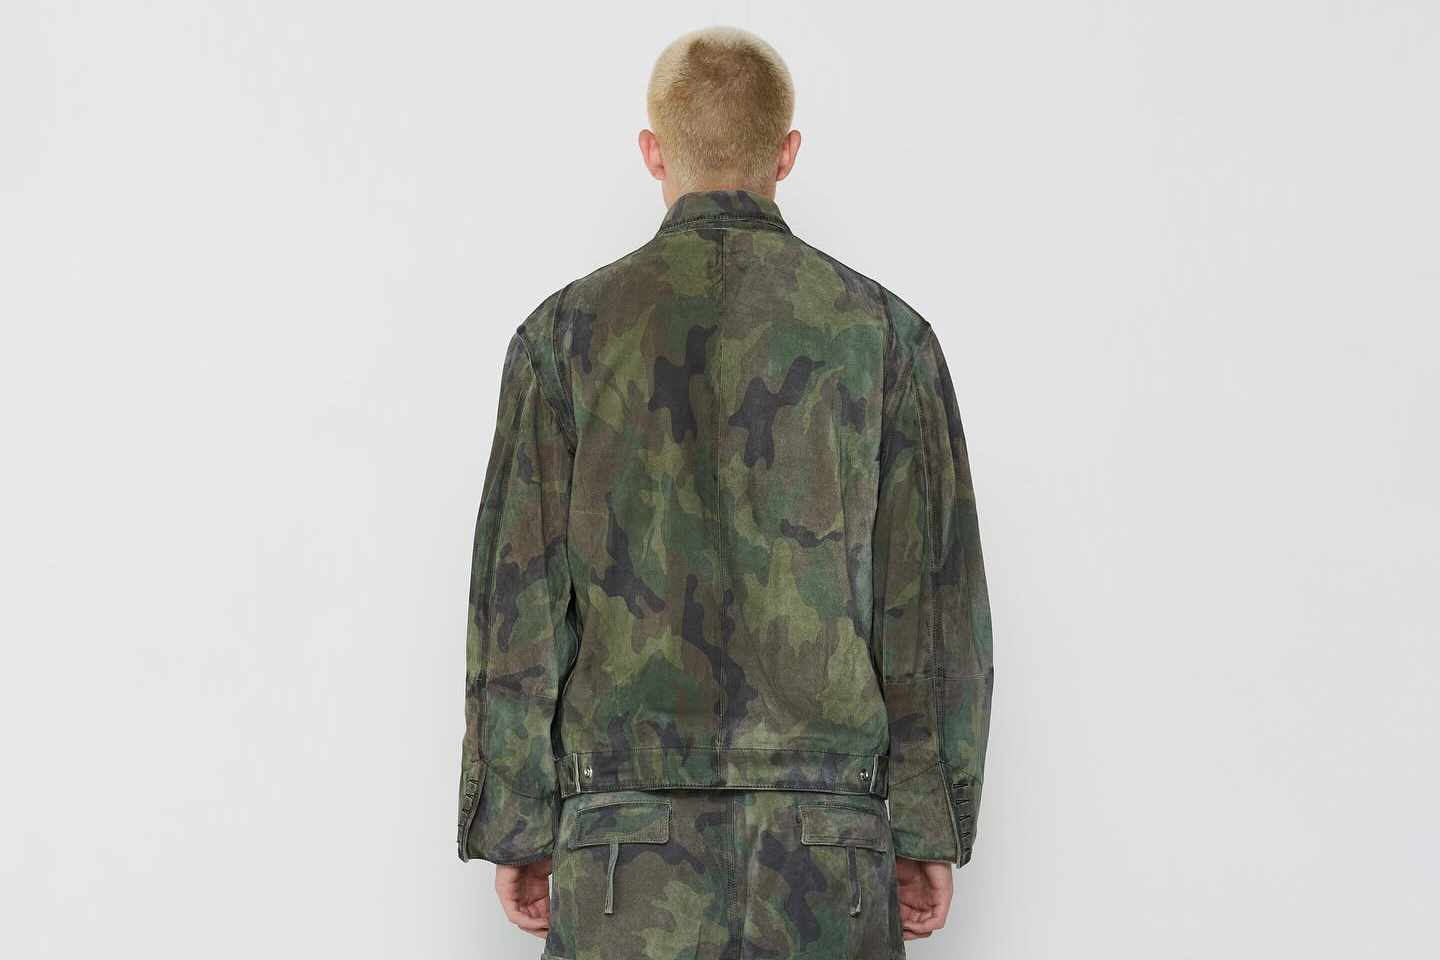 A model wears a camouflage 424 outfit, including camo shorts and camo pants